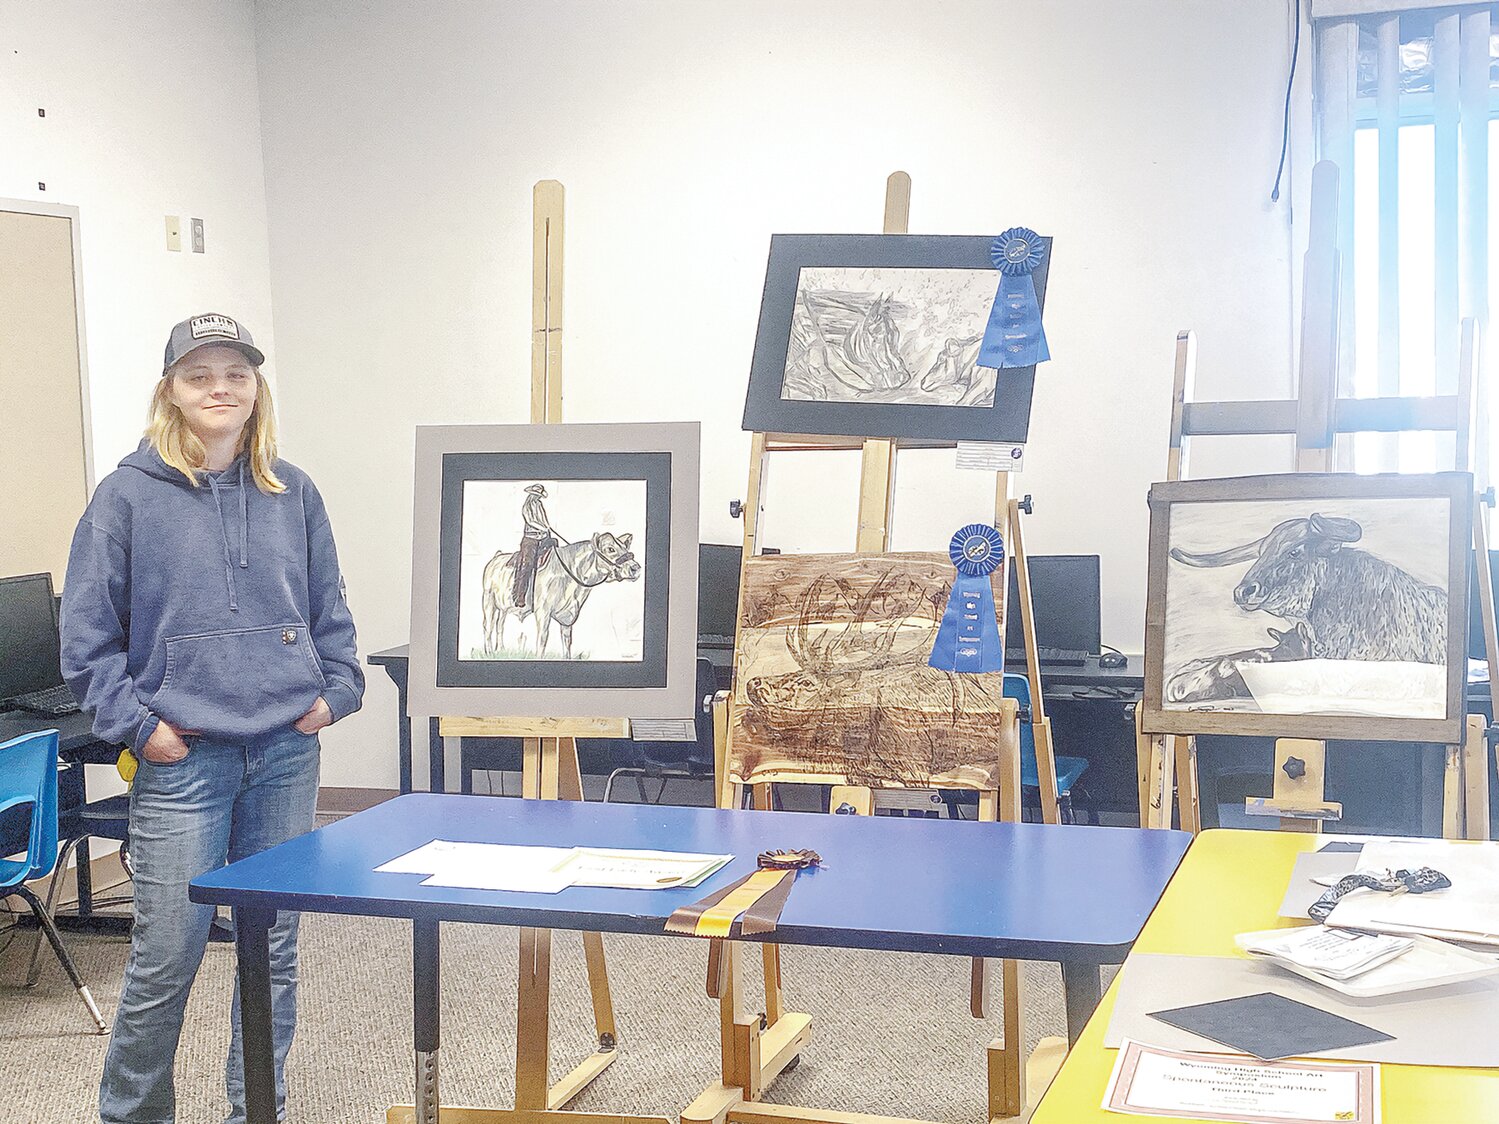 Art by local student to be displayed at governor’s mansion – Platte County Record-Times